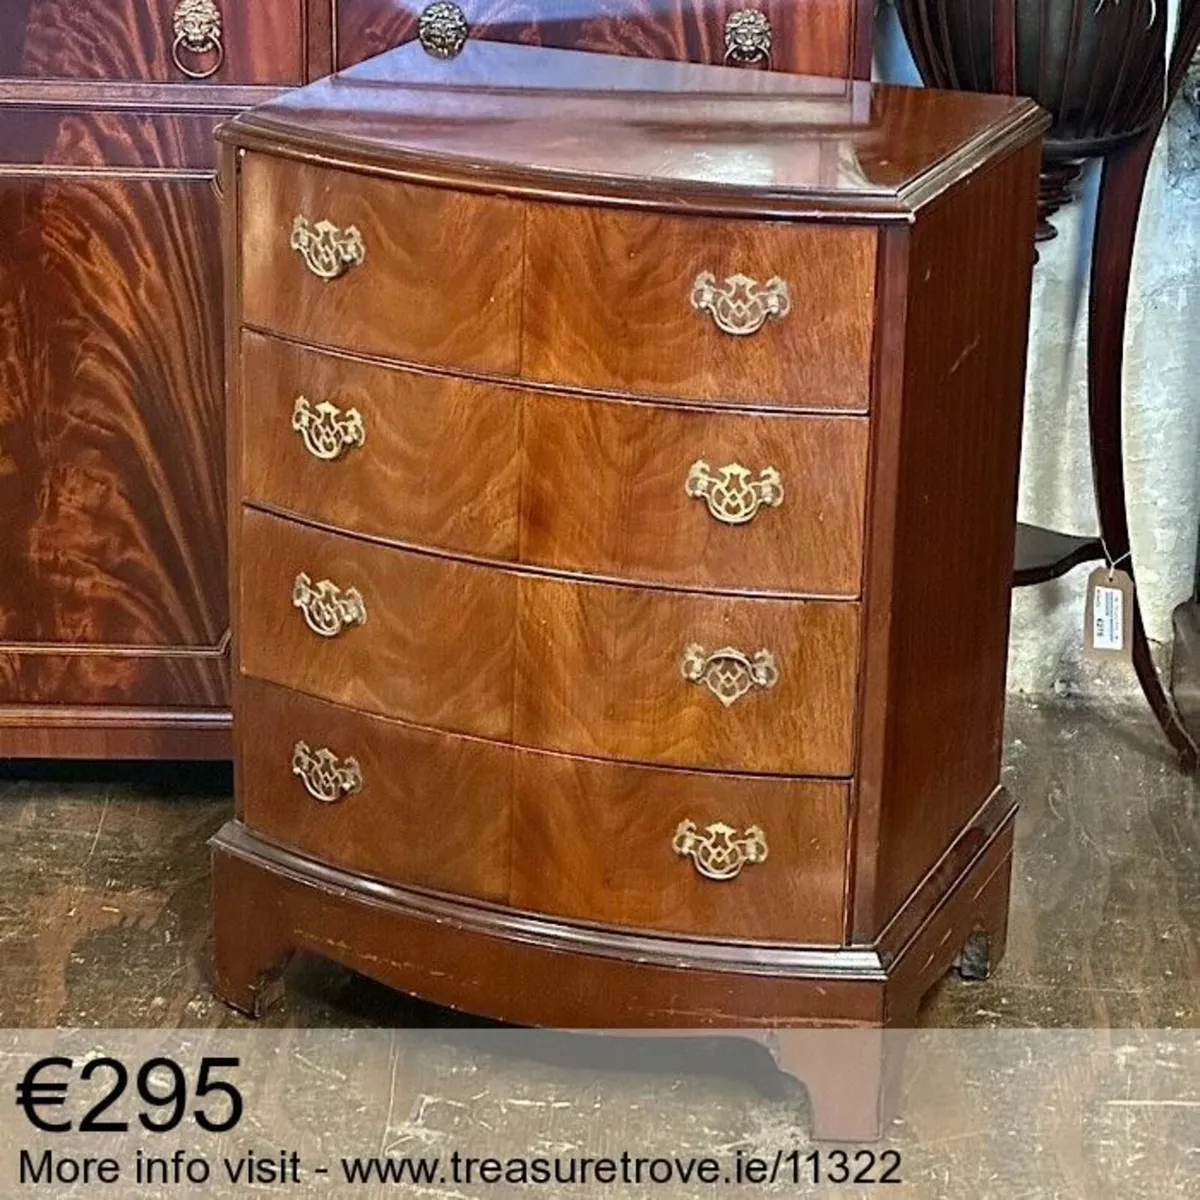 Small chests, bedside tables, drawers